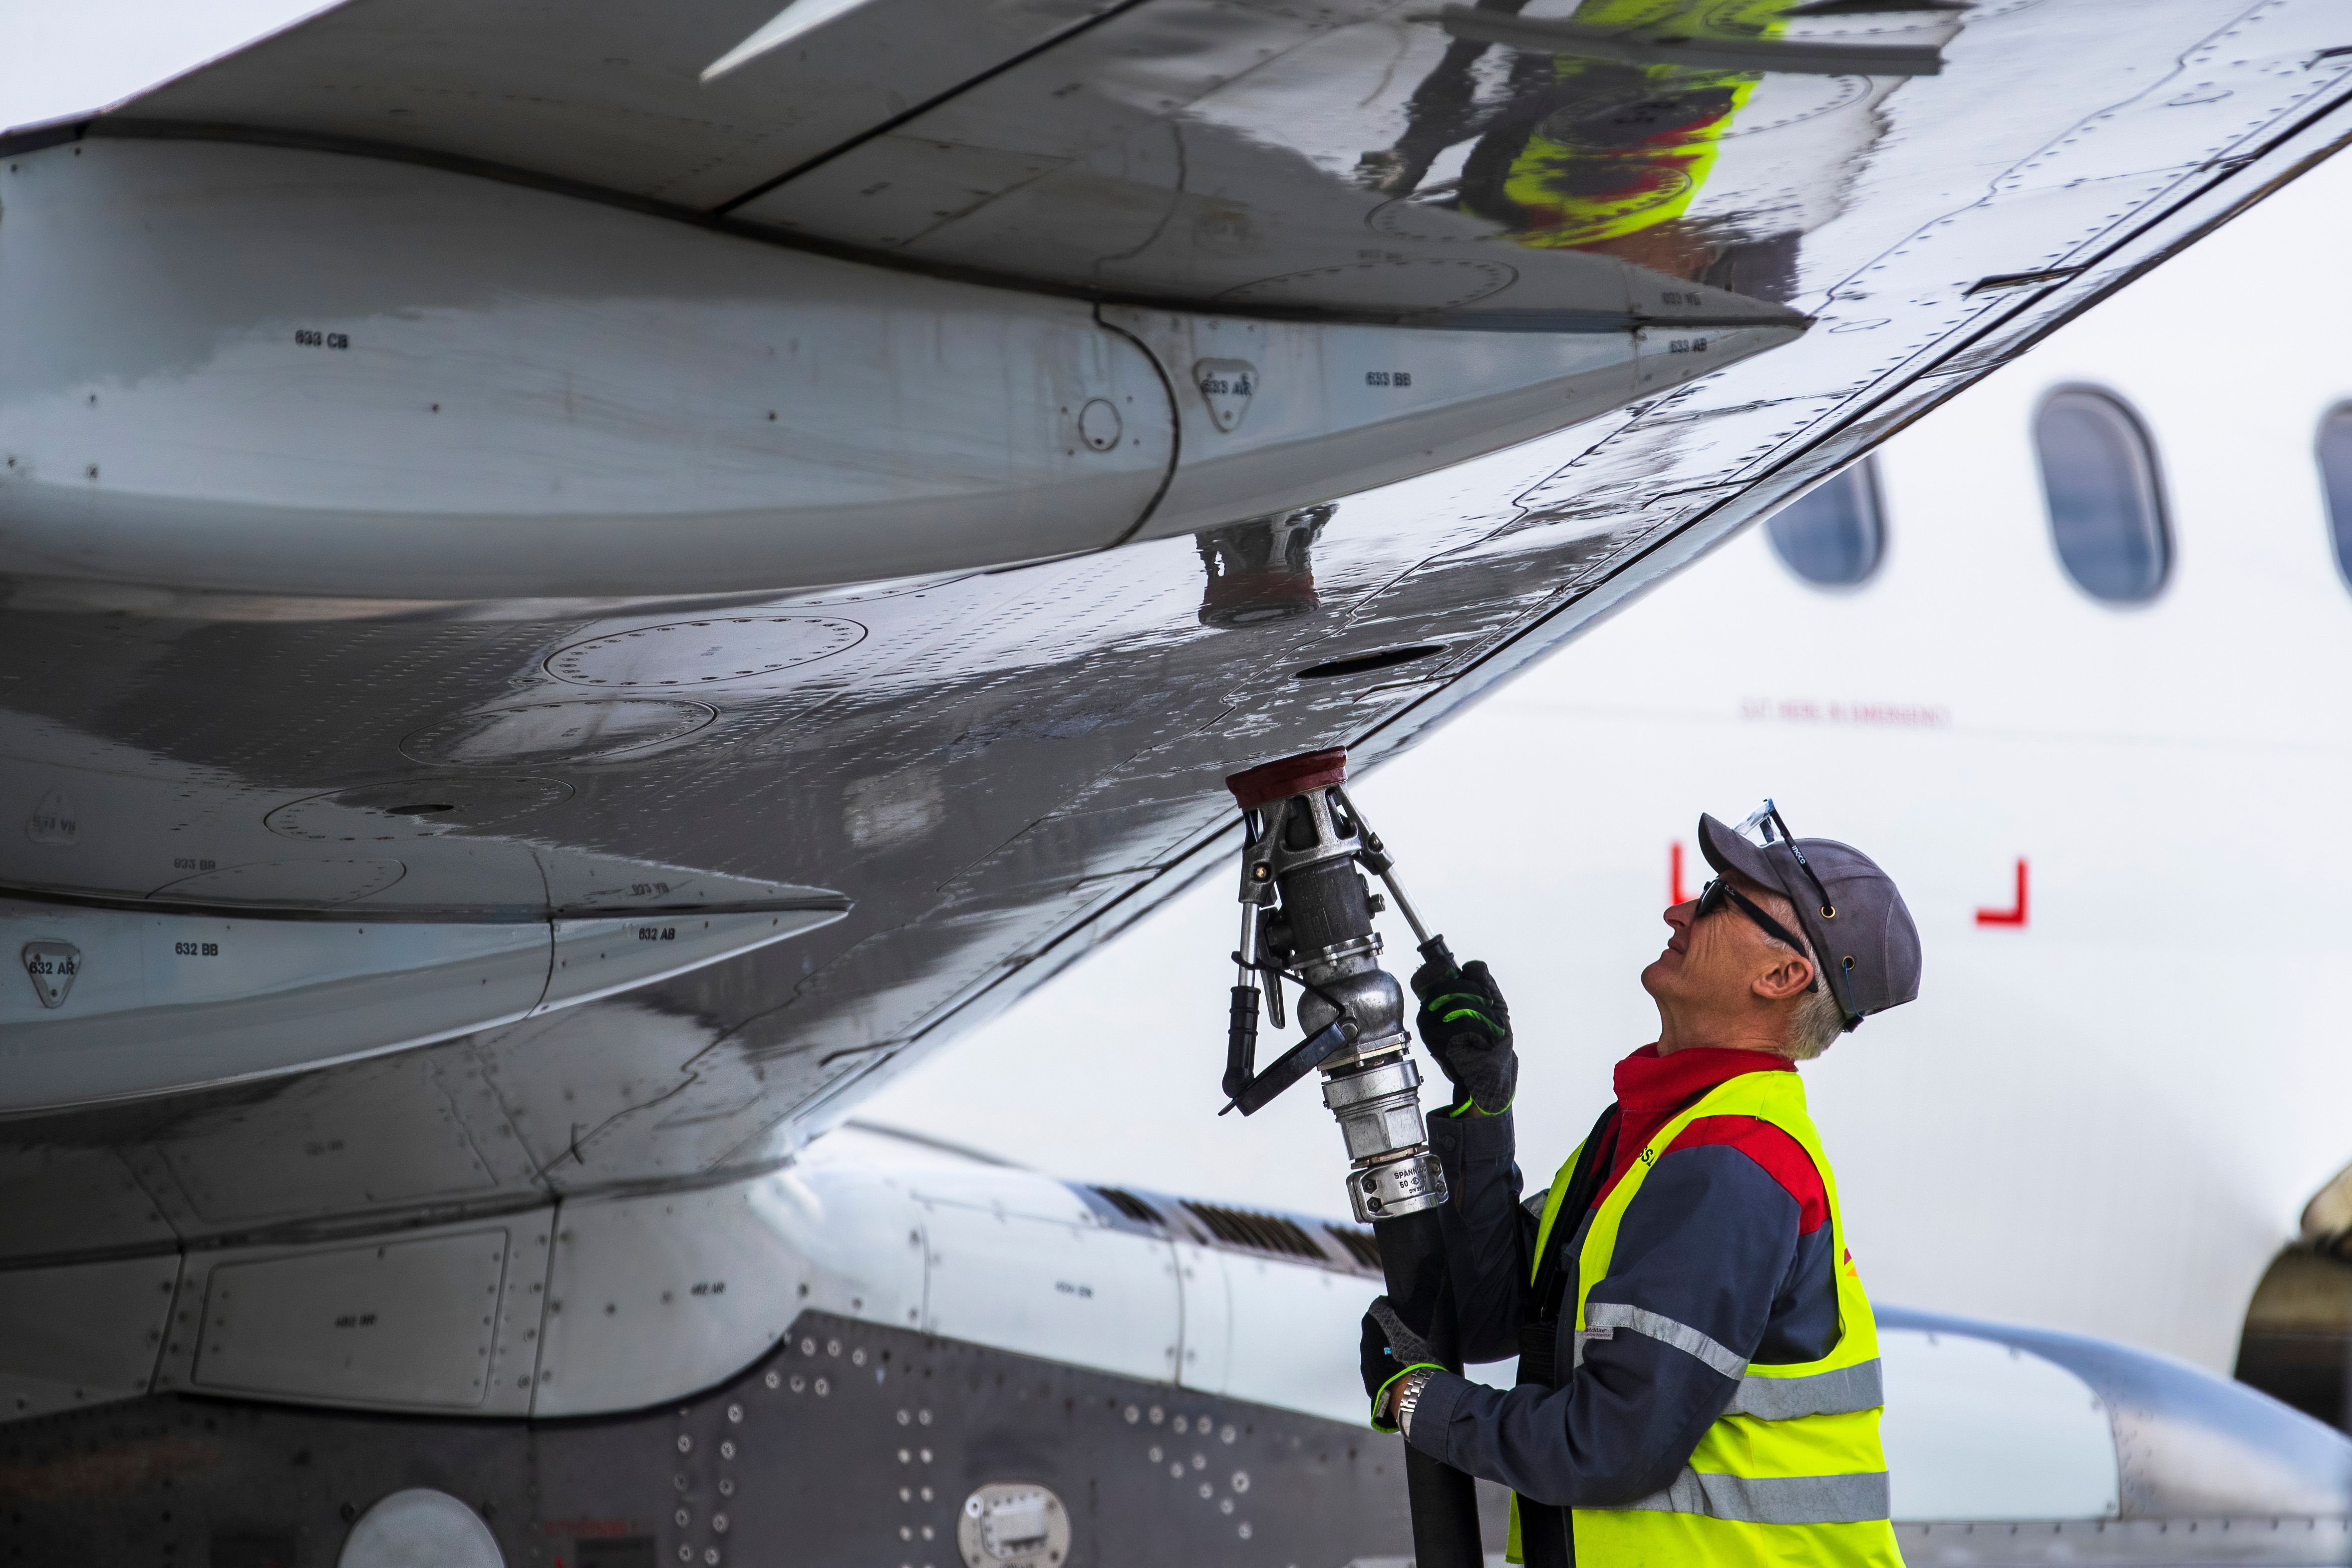 A fueling technician attaches a nozzle to the fuel panel.